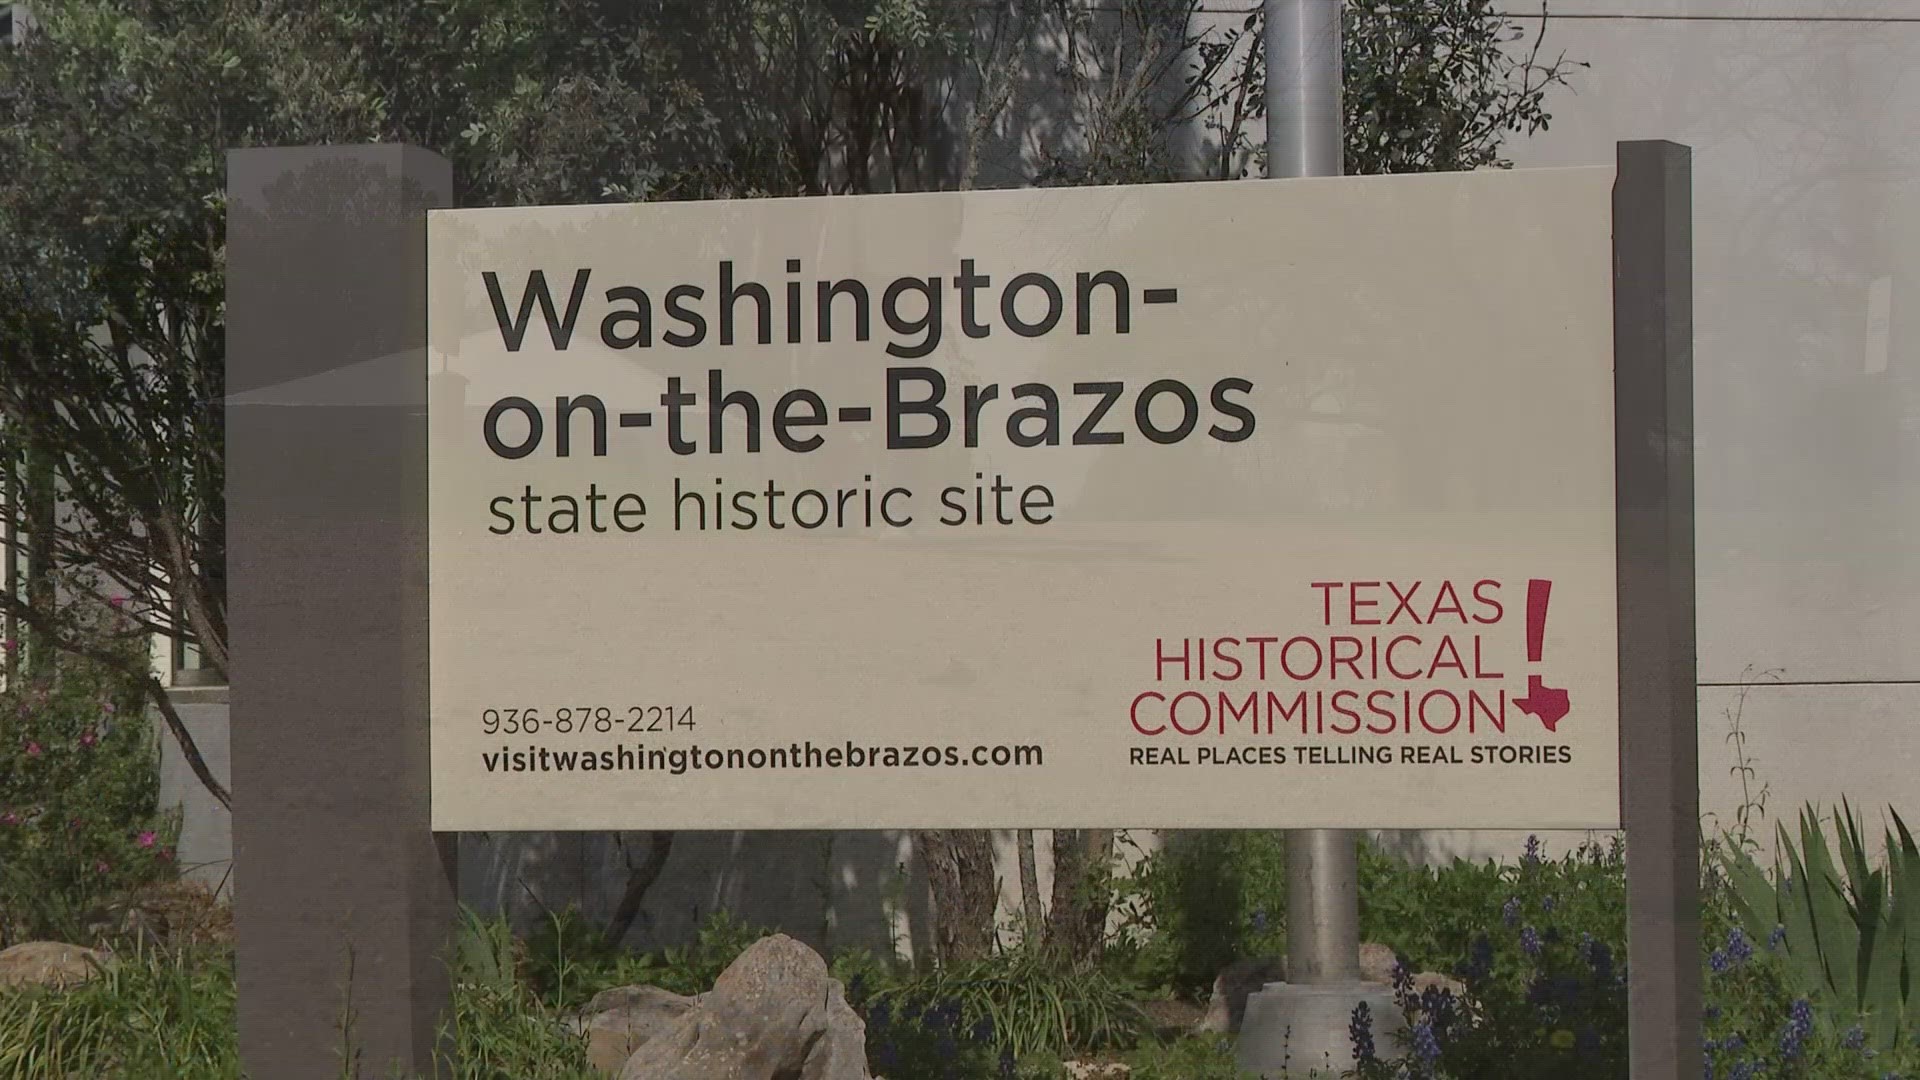 Washington-on-the-Brazos is where delegates officially declared independence from Mexico in 1836.